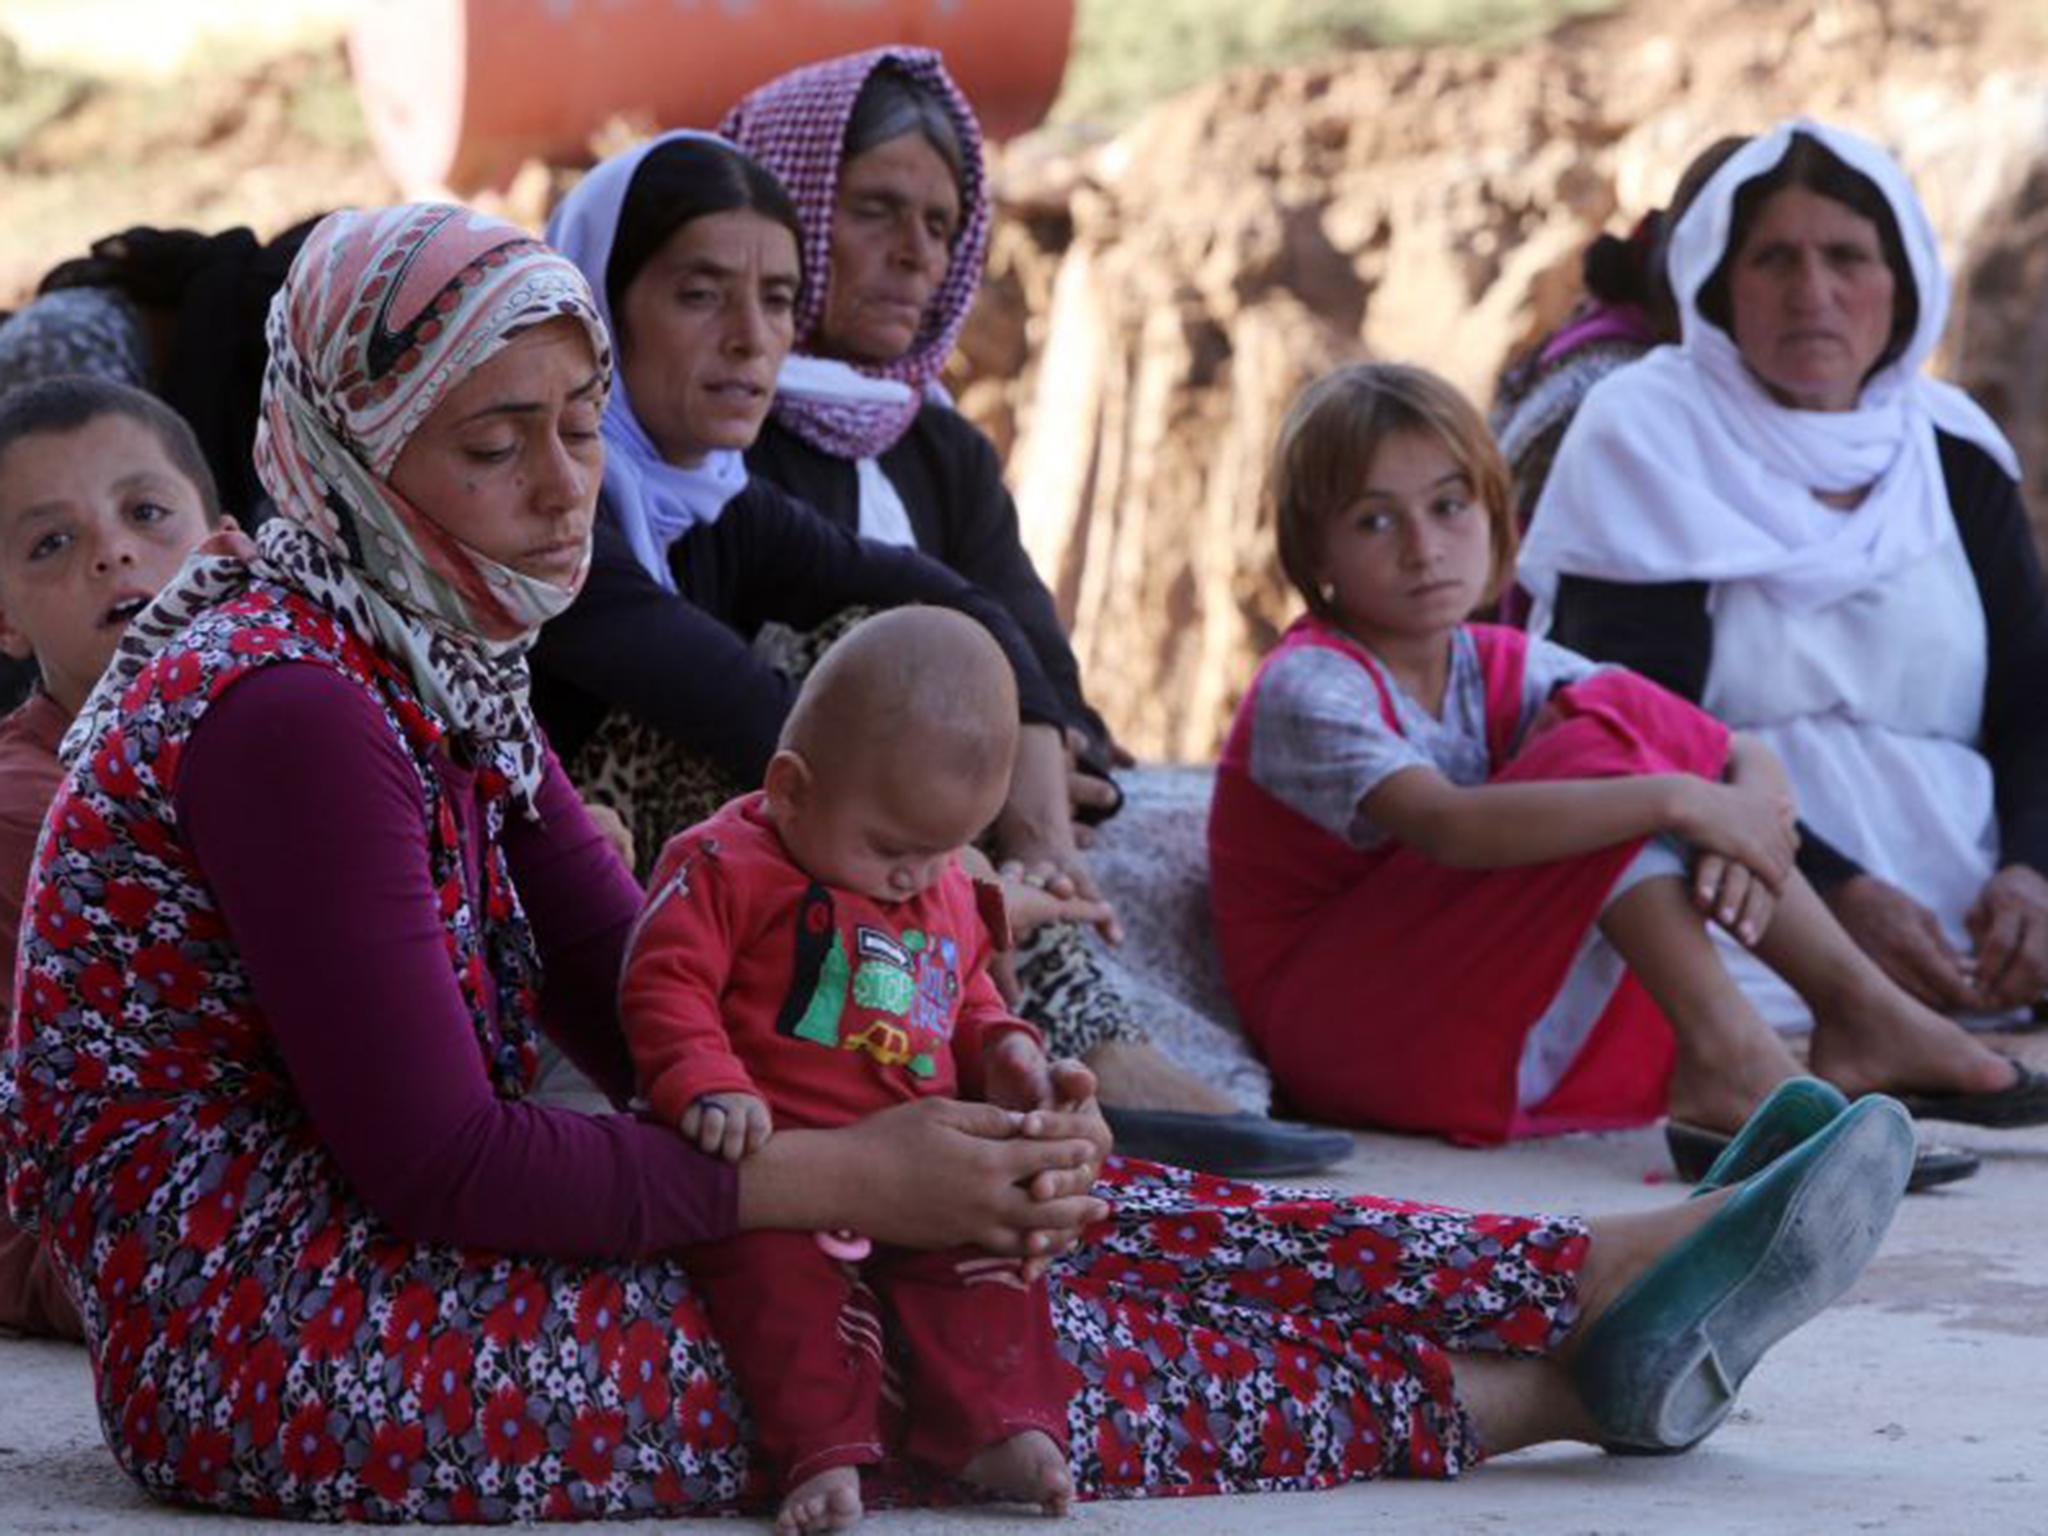 These Iraqi Yazidis fled to Kurdistan when Isis attacked the town of Sinjar